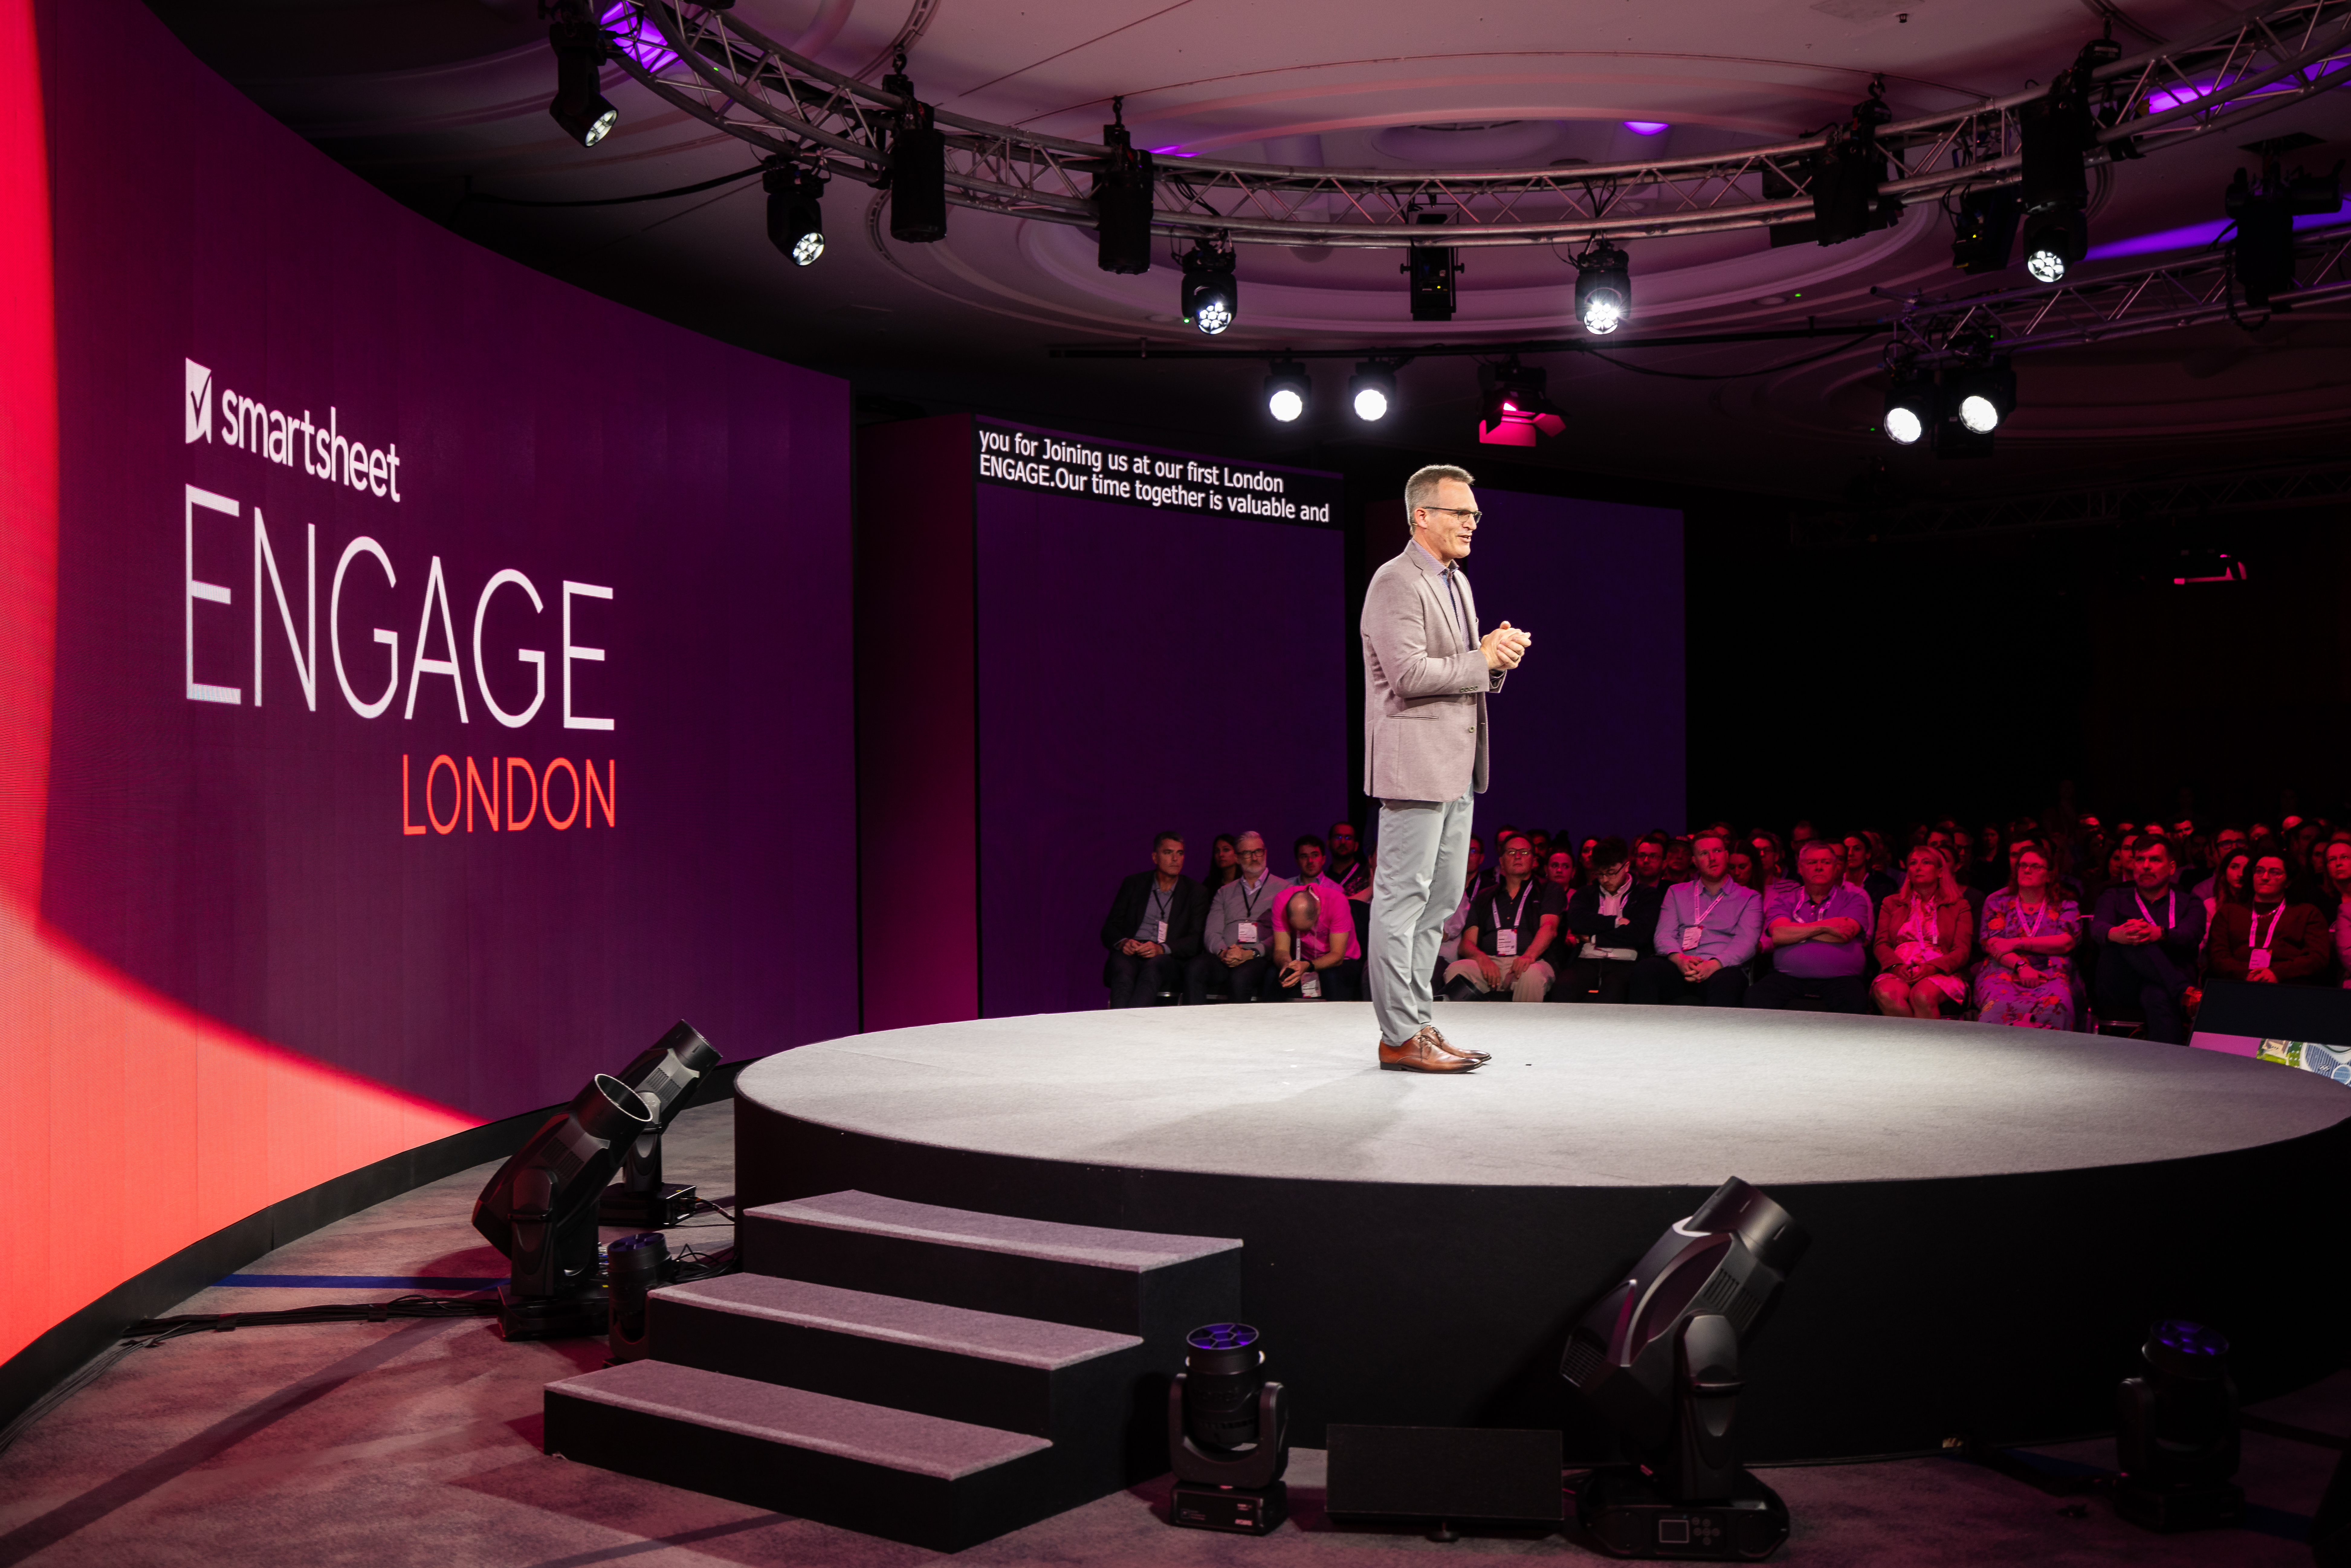 Smartsheet CEO takes the stage to kick off ENGAGE in London during the opening keynote.